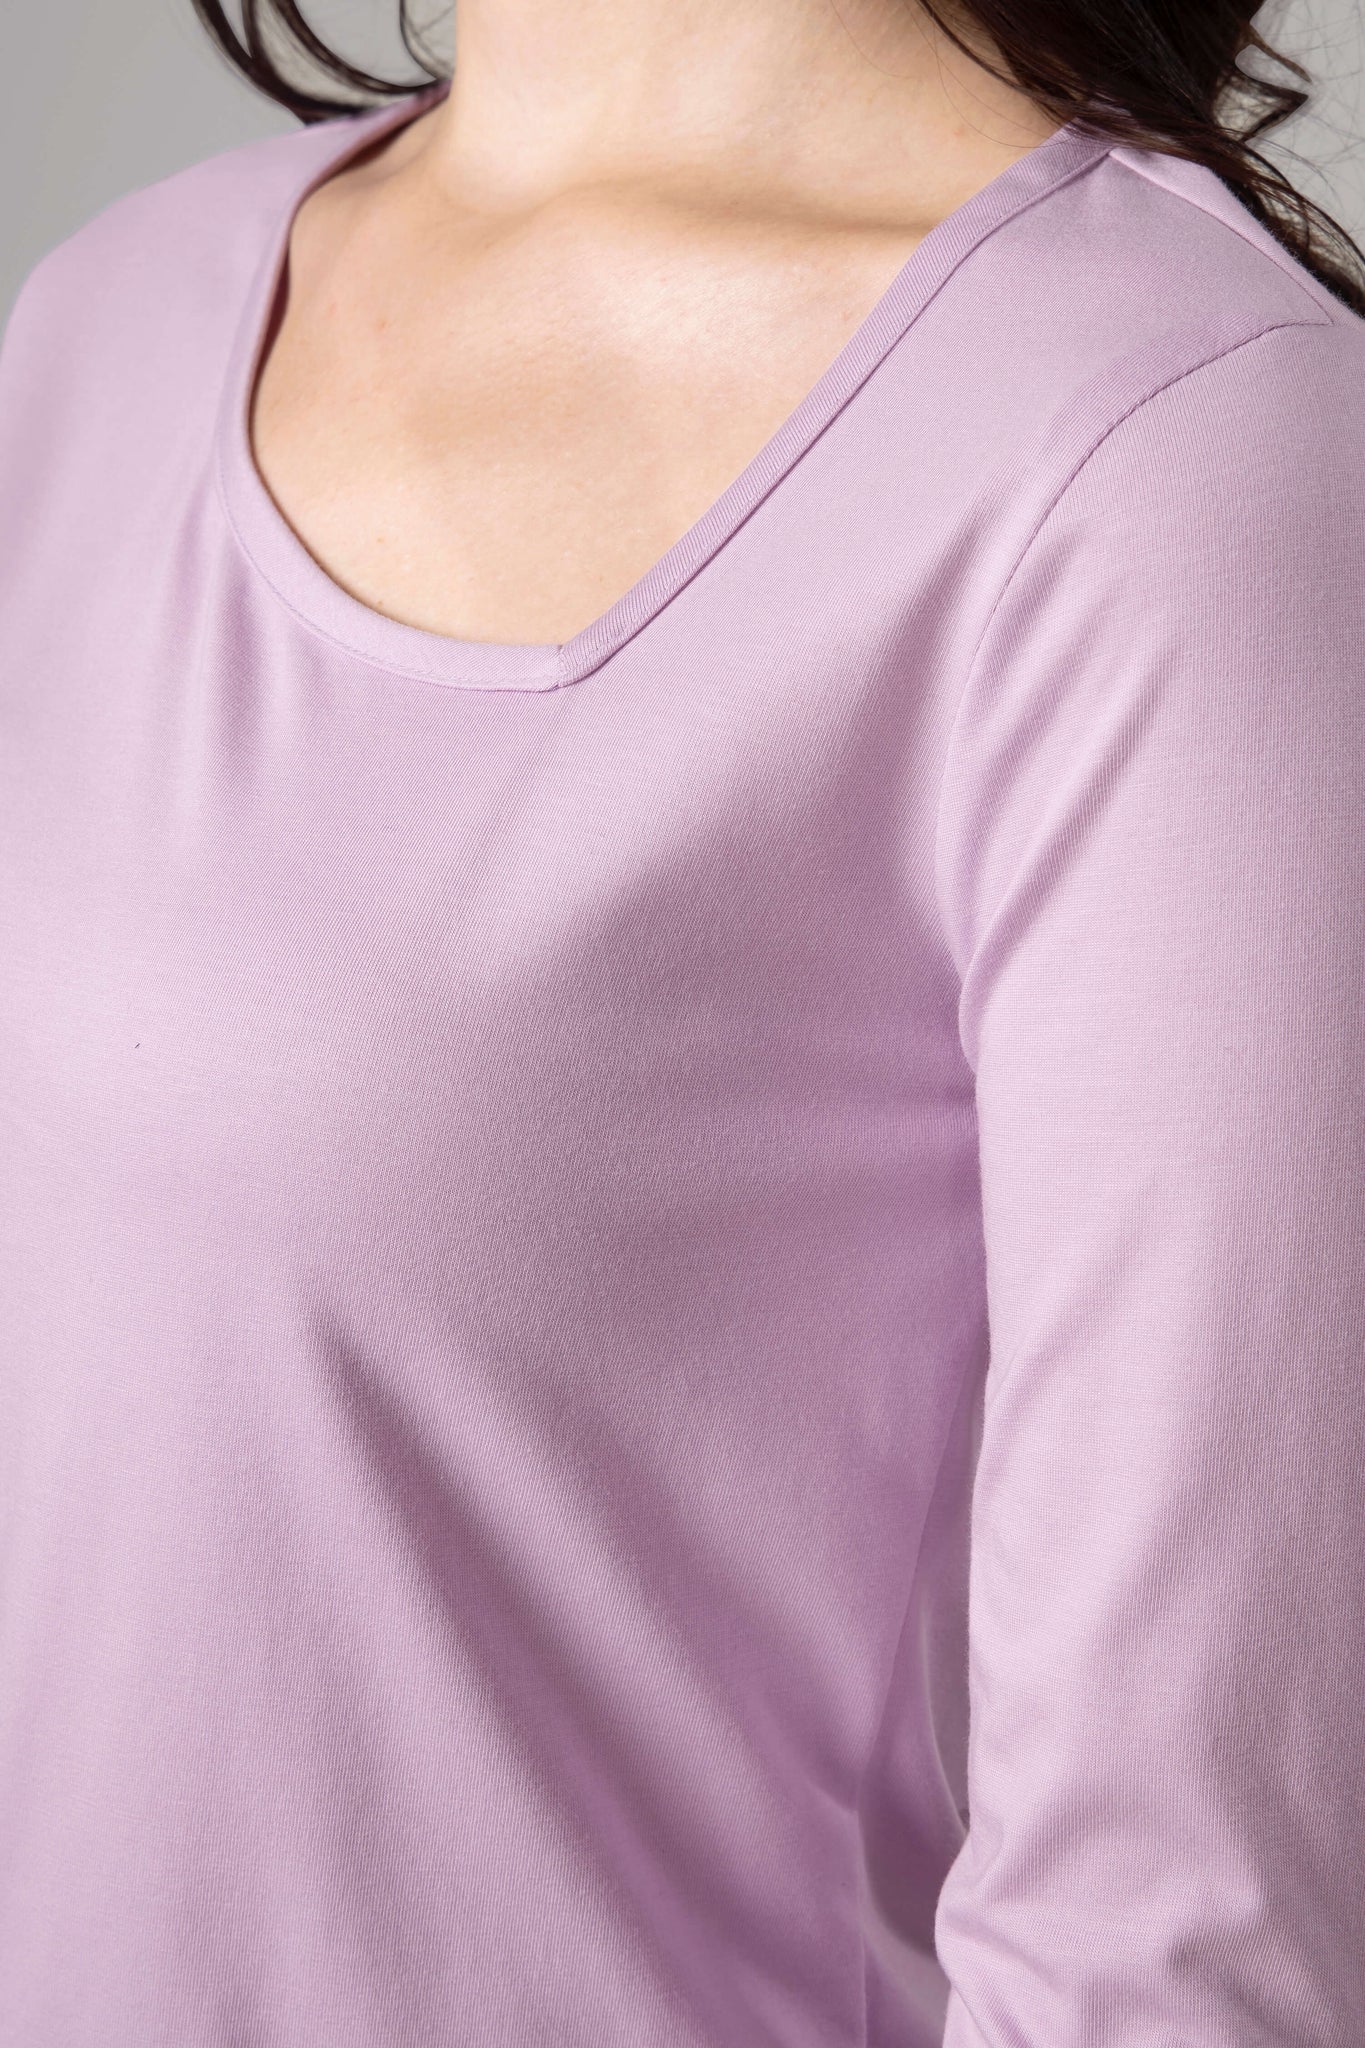 Women's Pure Comfort Cotton T-Shirt For Everyday